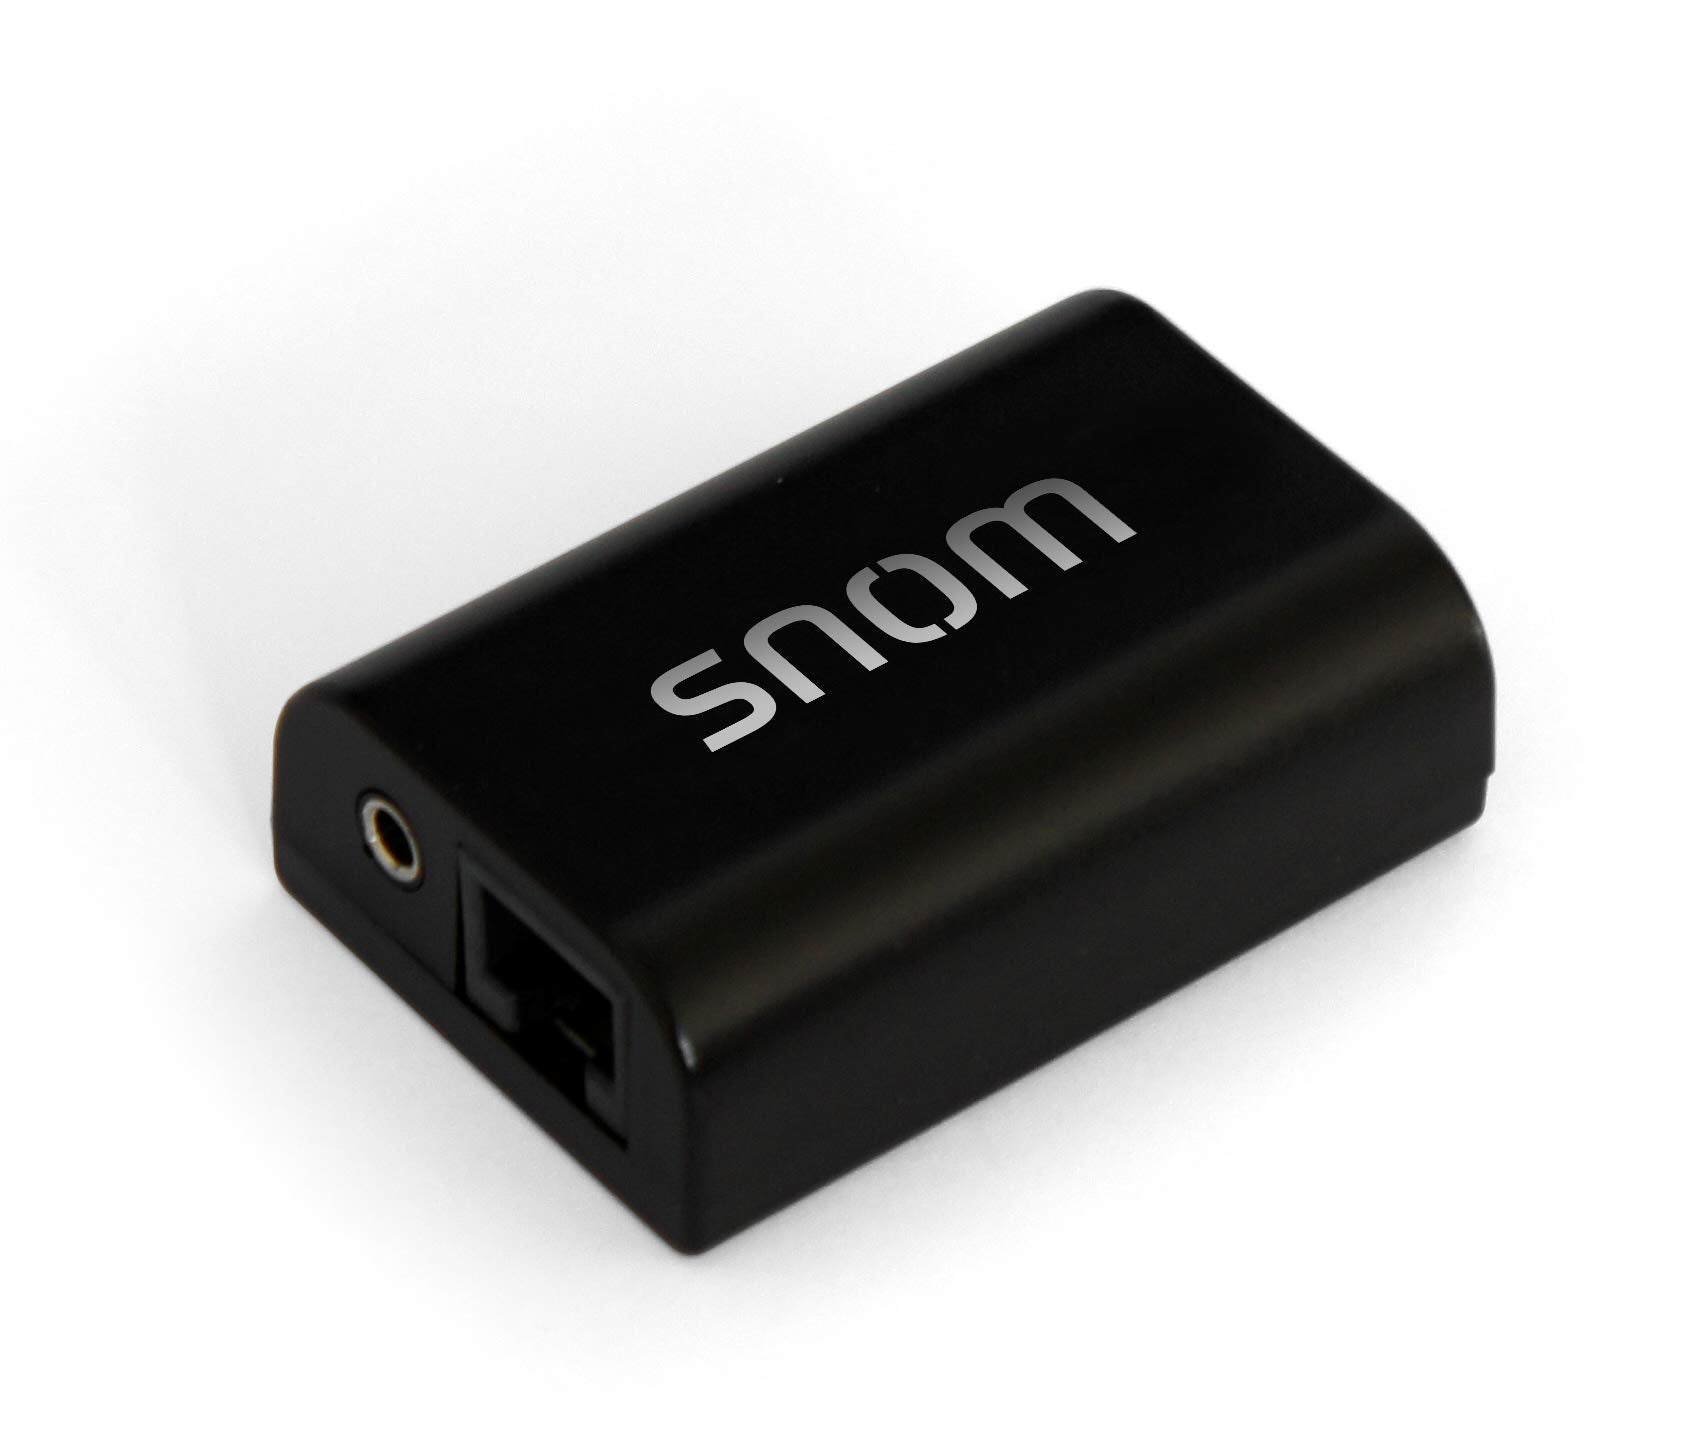 SNOM Wireless Headset Adapter,  Complete freedom of movement, DHSG Standard, No Additional Power Supply Required-0